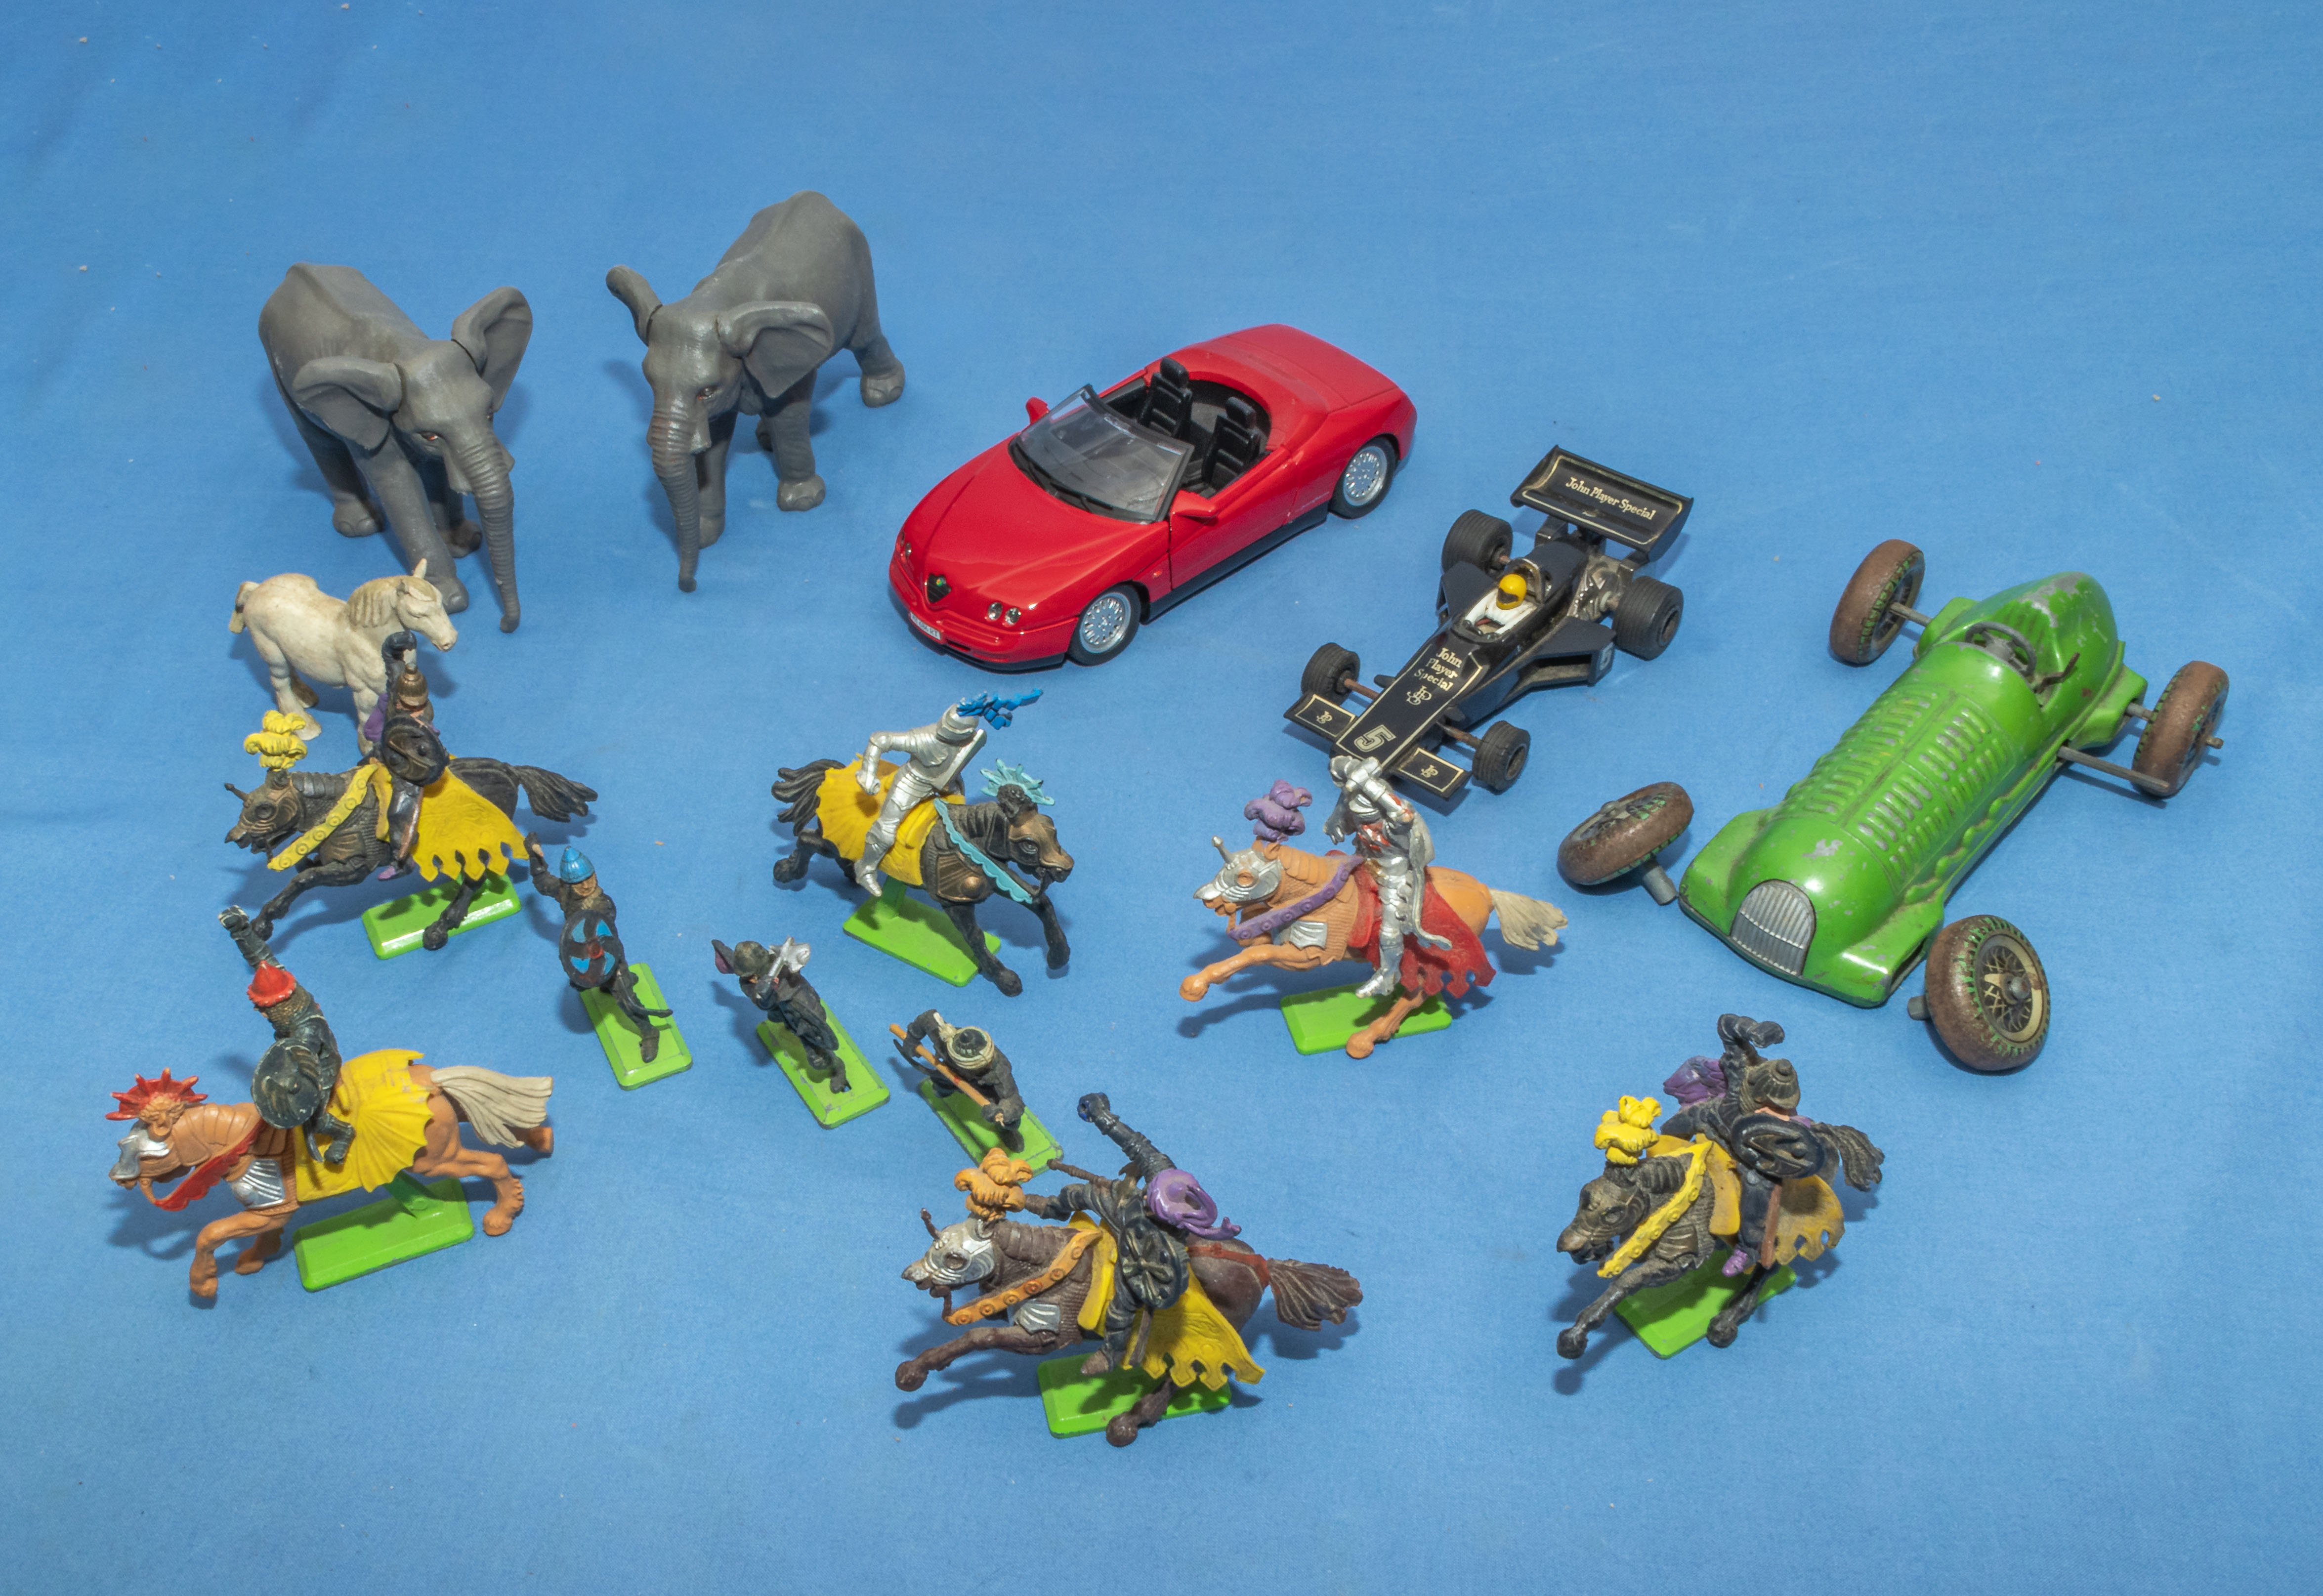 Two Britain's elephants, Saracen and Crusader knights and horses, 1940's Mettoy Racing car and two